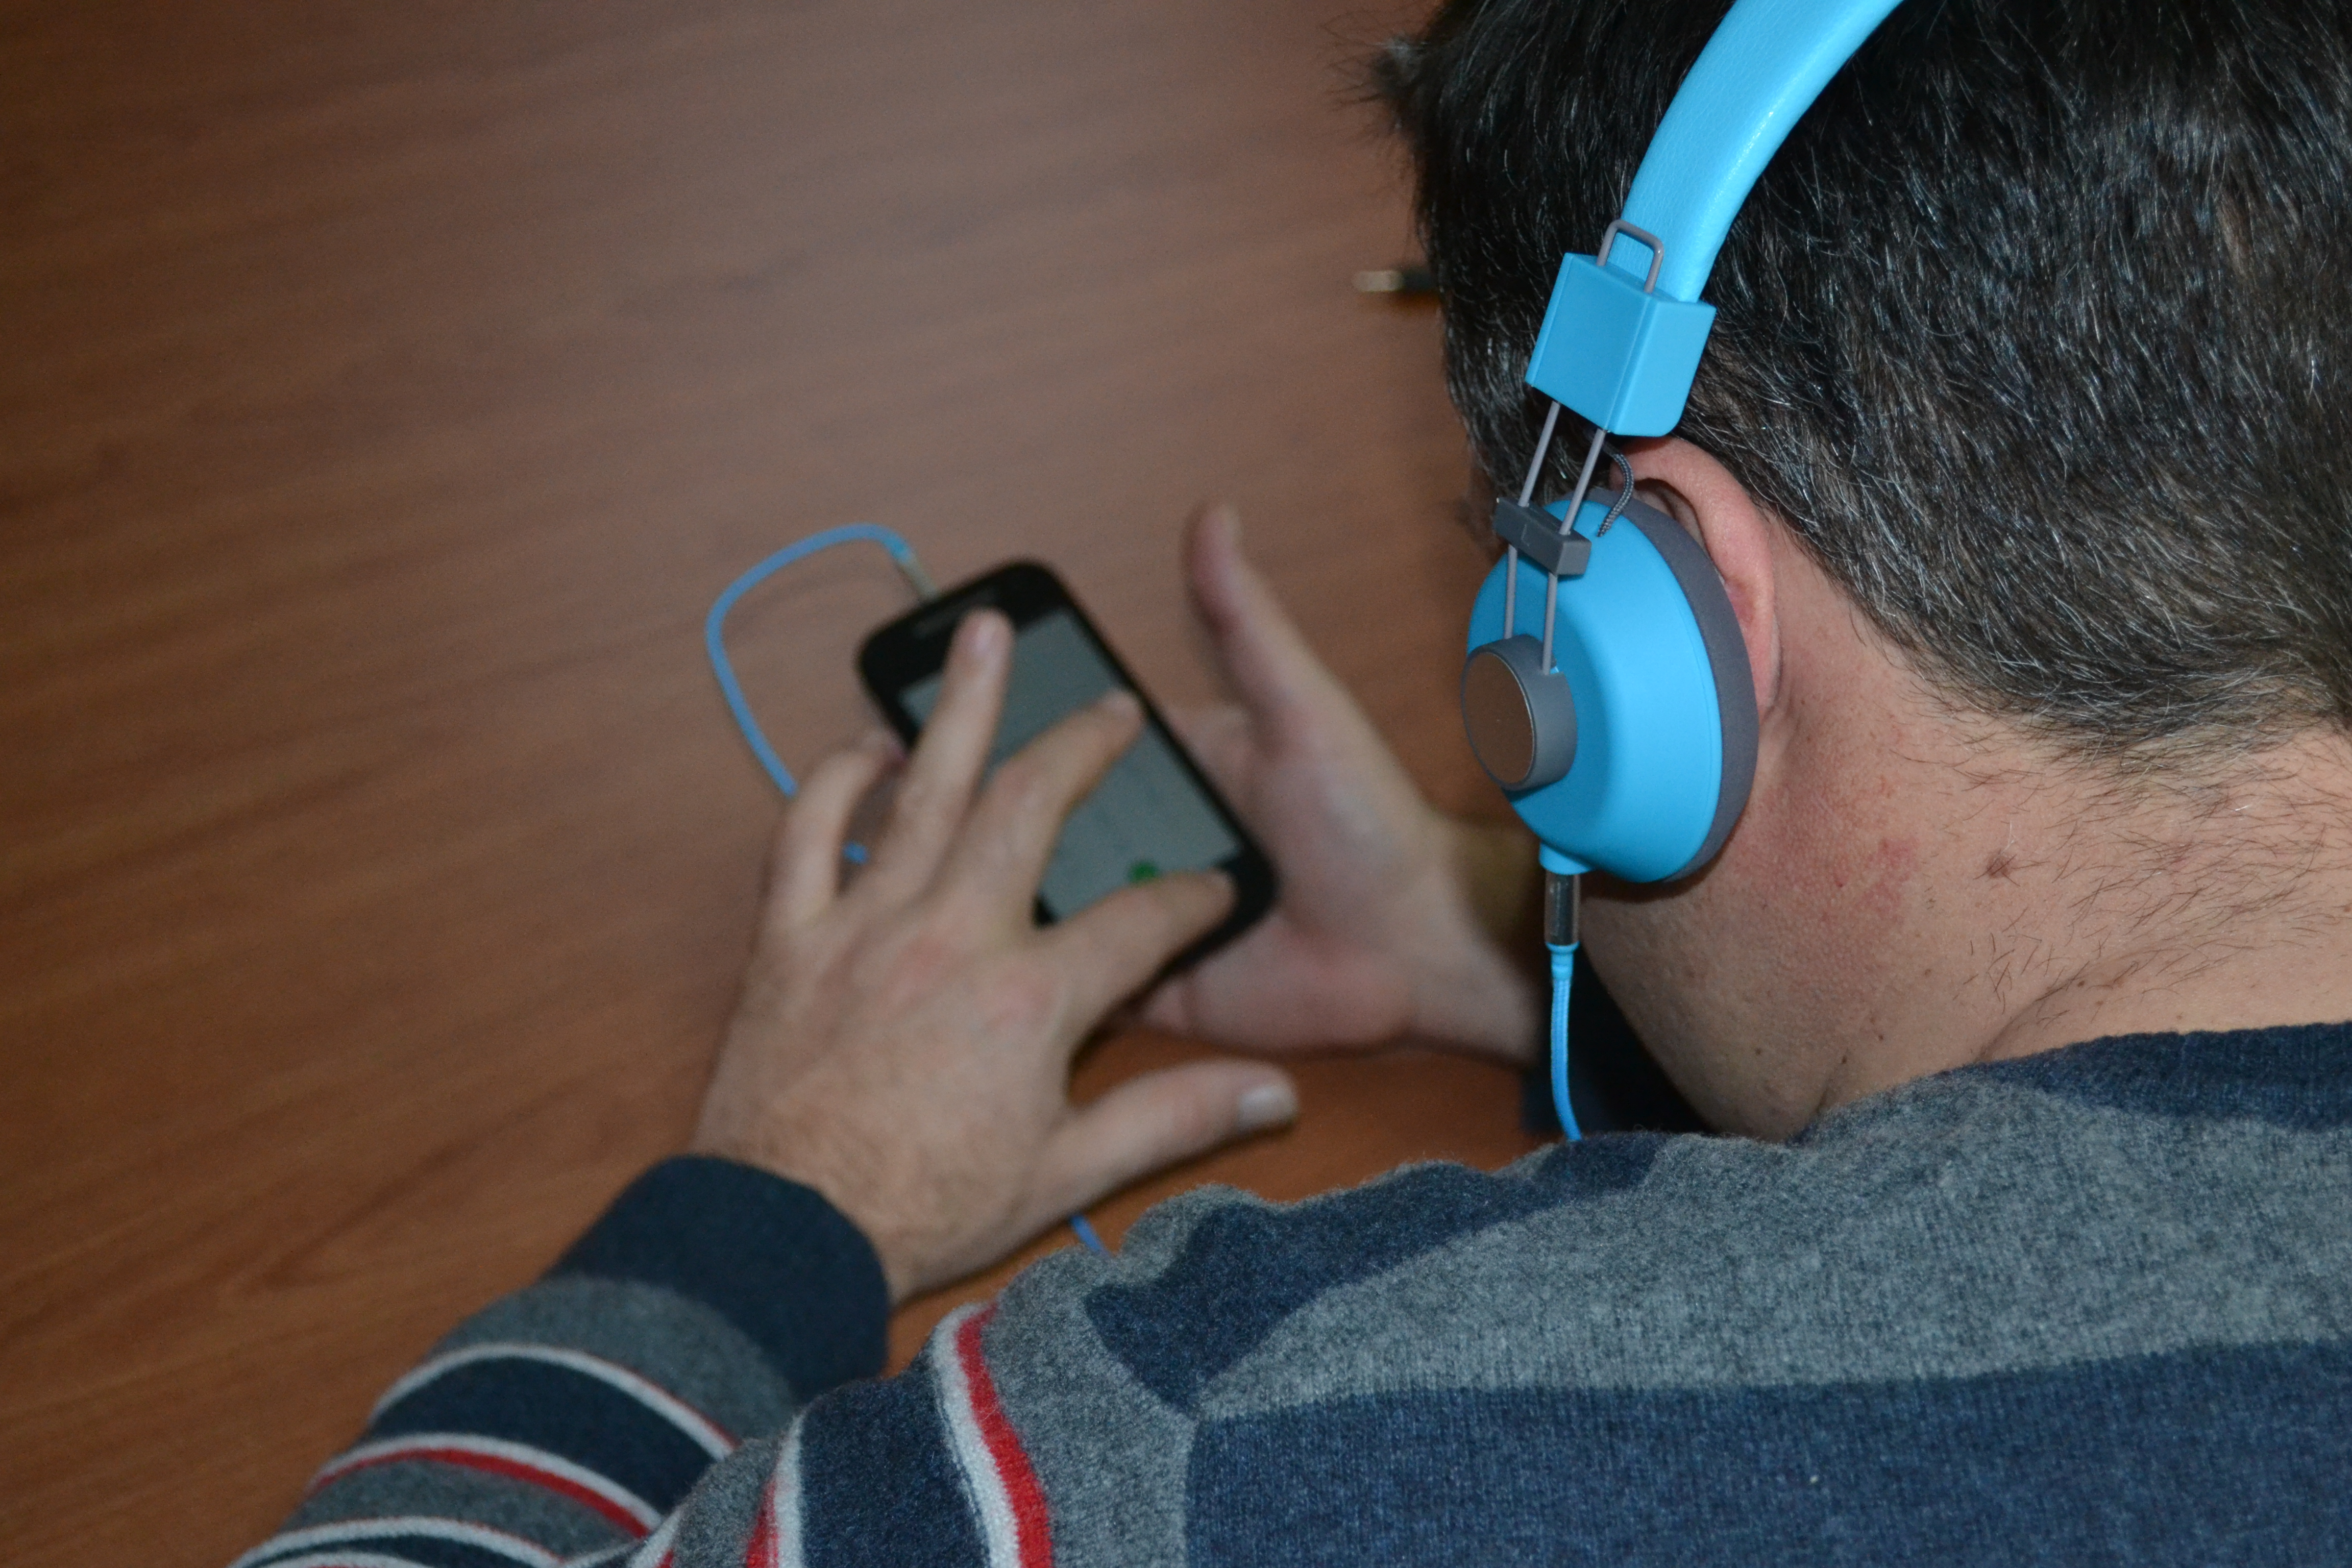 A blind person using an headset and exploring a smartphone touchscreen with explore by touch.